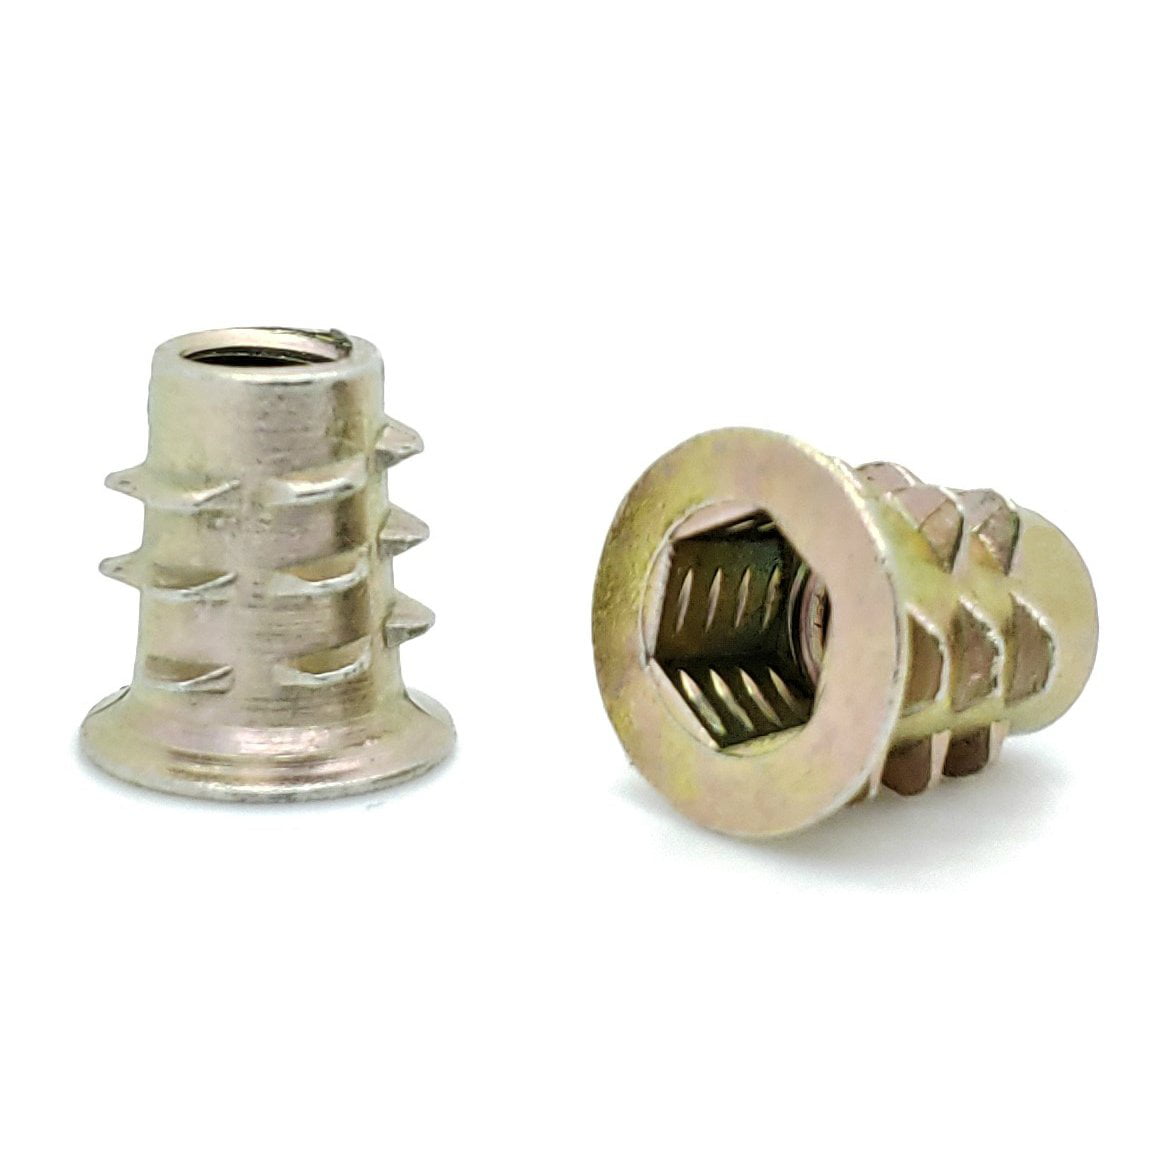 Stainless Steel Helicoil Thread Insert 1/2-13 x 1 Diameter Qty-100 